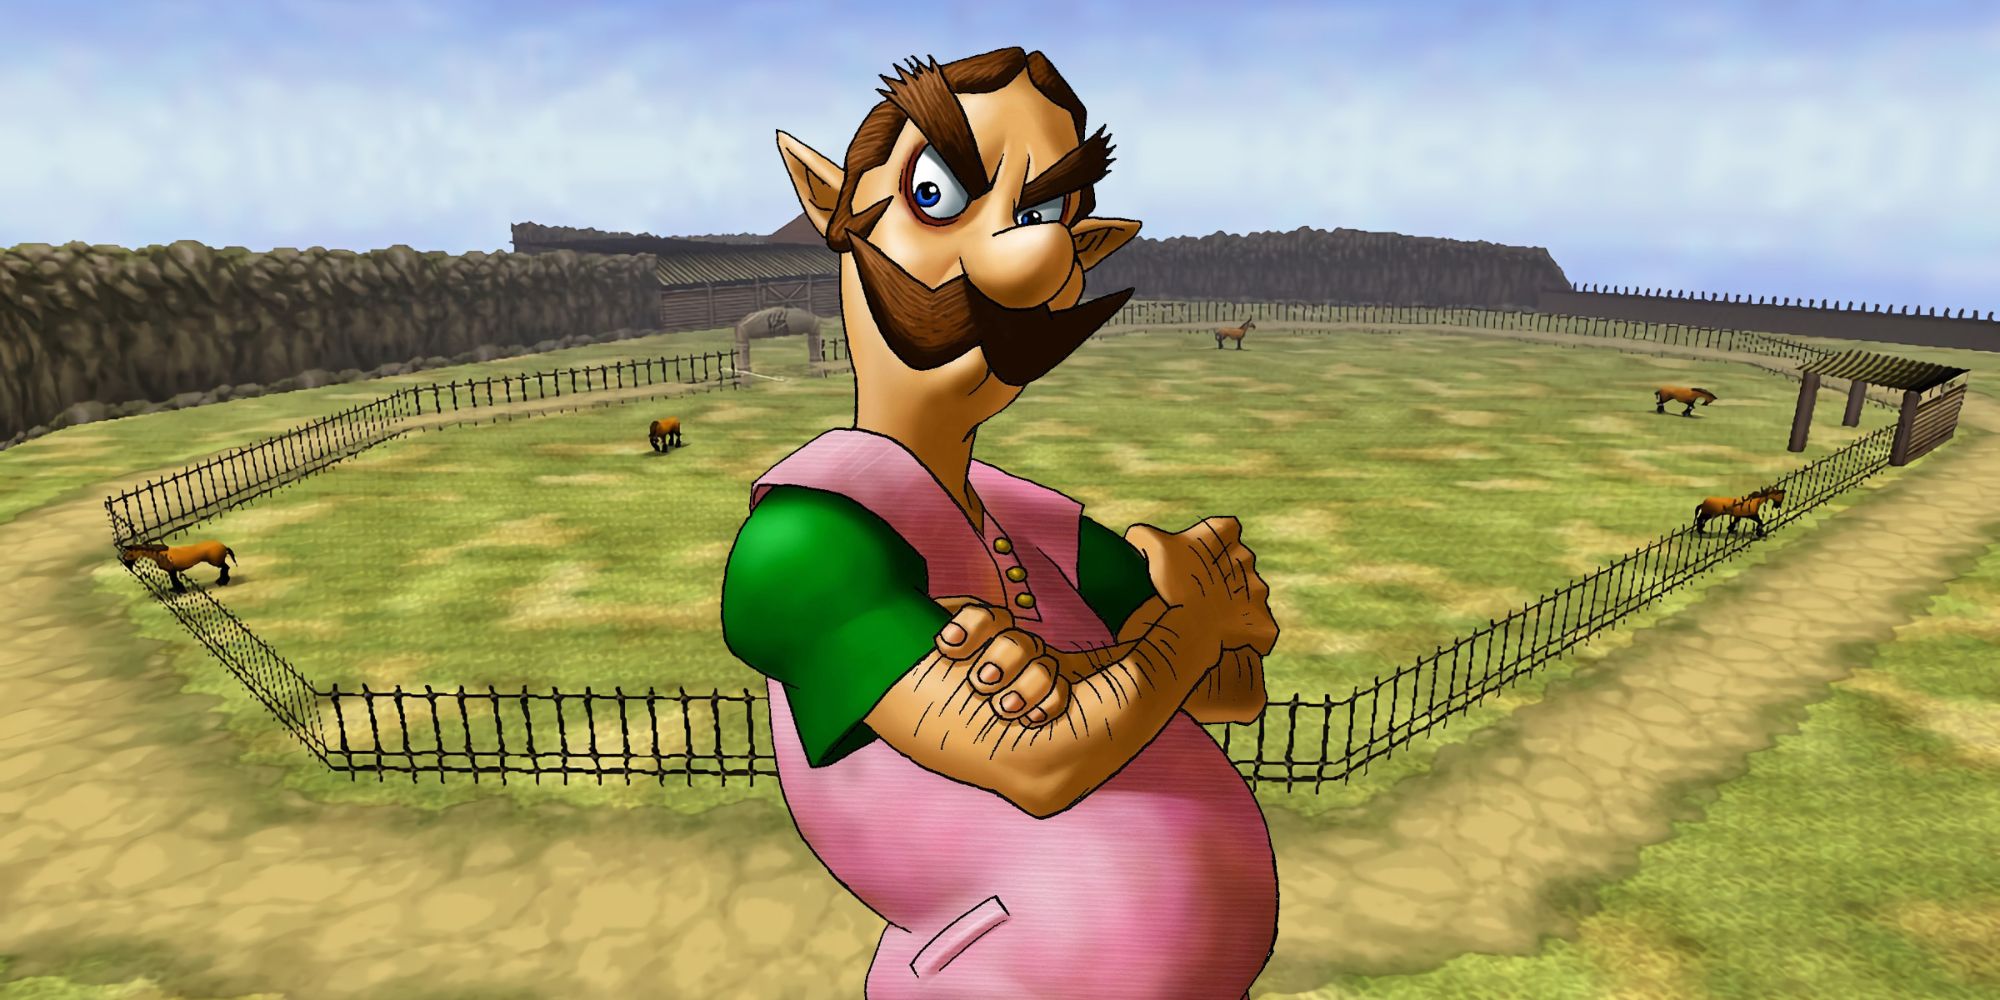 Official artwork of Ingo in front of a background showing Lon Lon Ranch in Ocarina of Time.